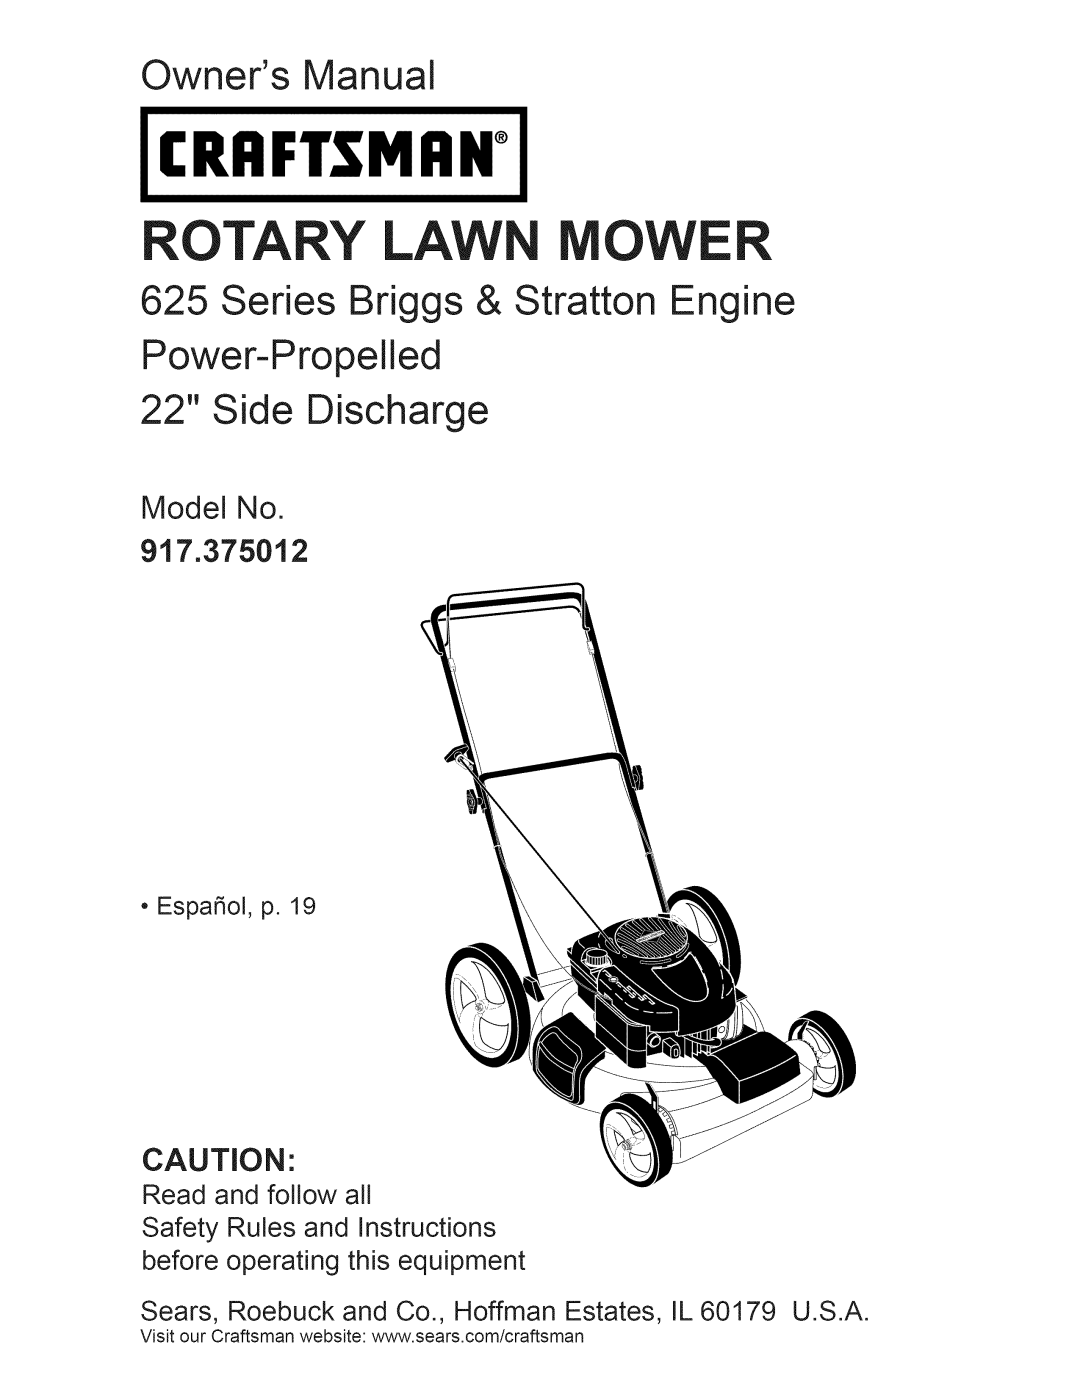 Craftsman owner manual Model No 917.375012, •EspaSol, p, Read and follow all, Craftsman, Rotary Lawn Mower 